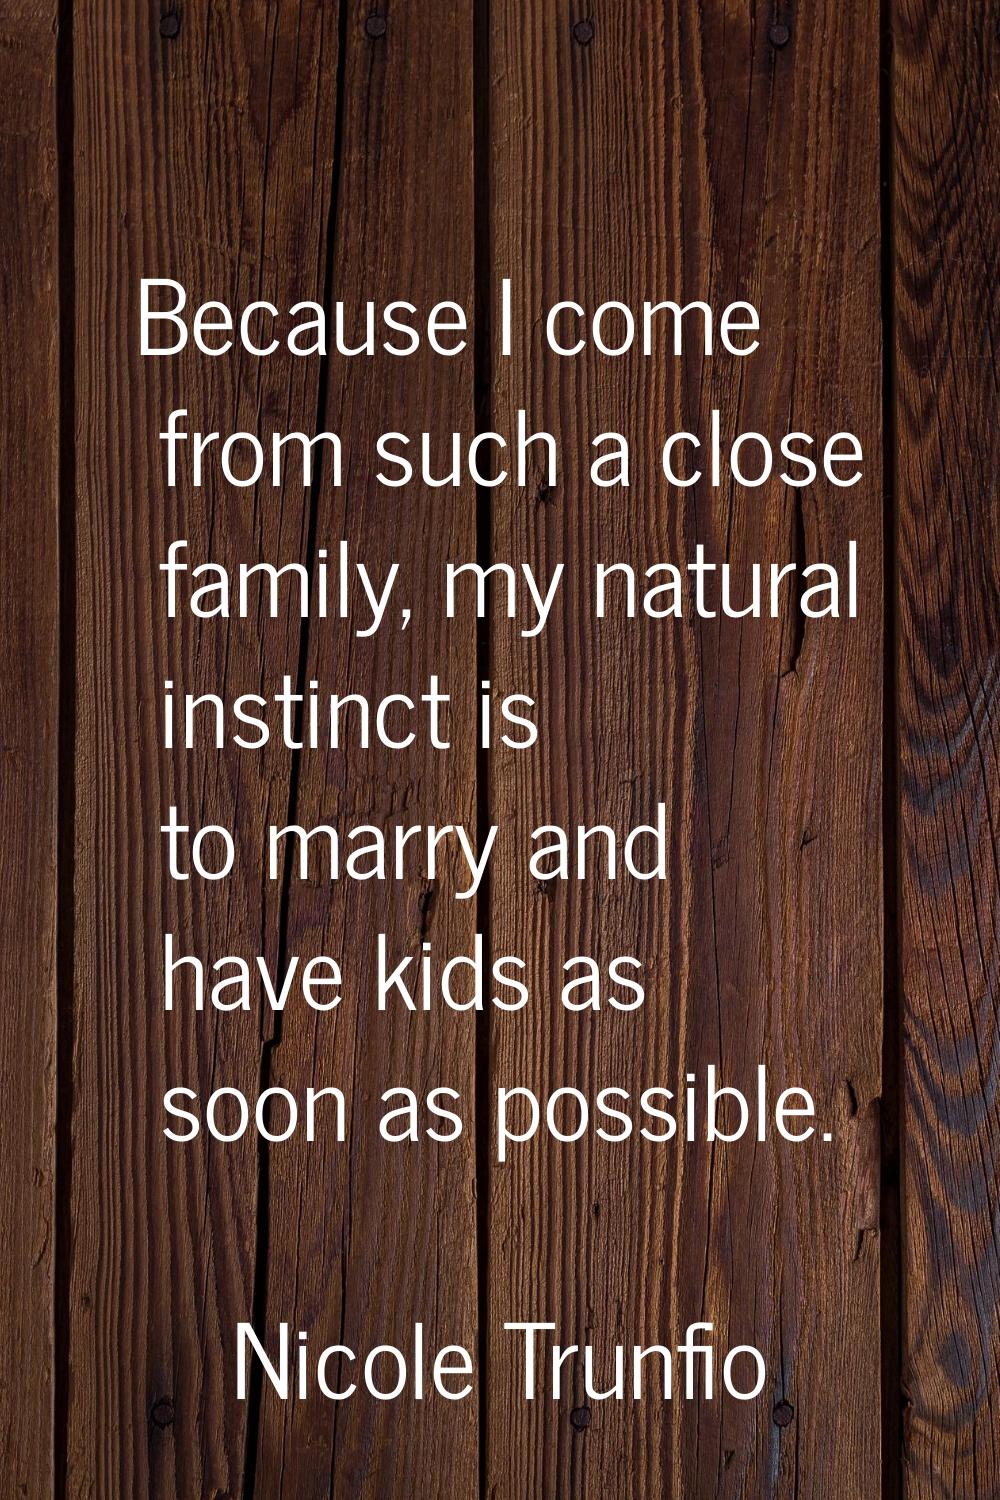 Because I come from such a close family, my natural instinct is to marry and have kids as soon as p